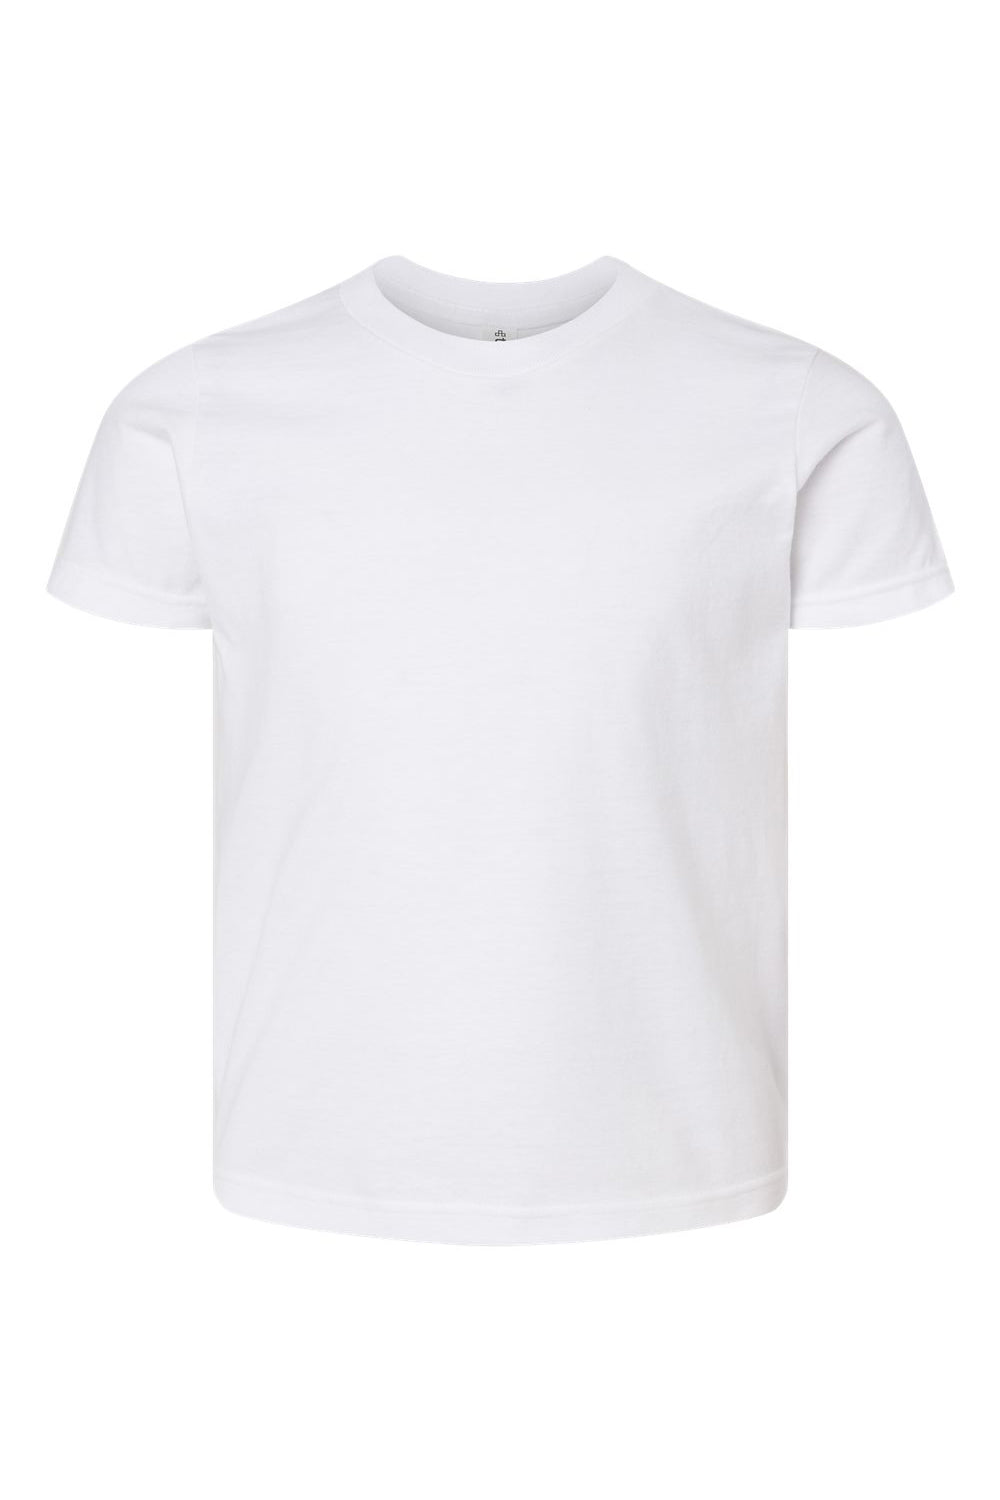 Tultex 235 Youth Fine Jersey Short Sleeve Crewneck T-Shirt White Flat Front